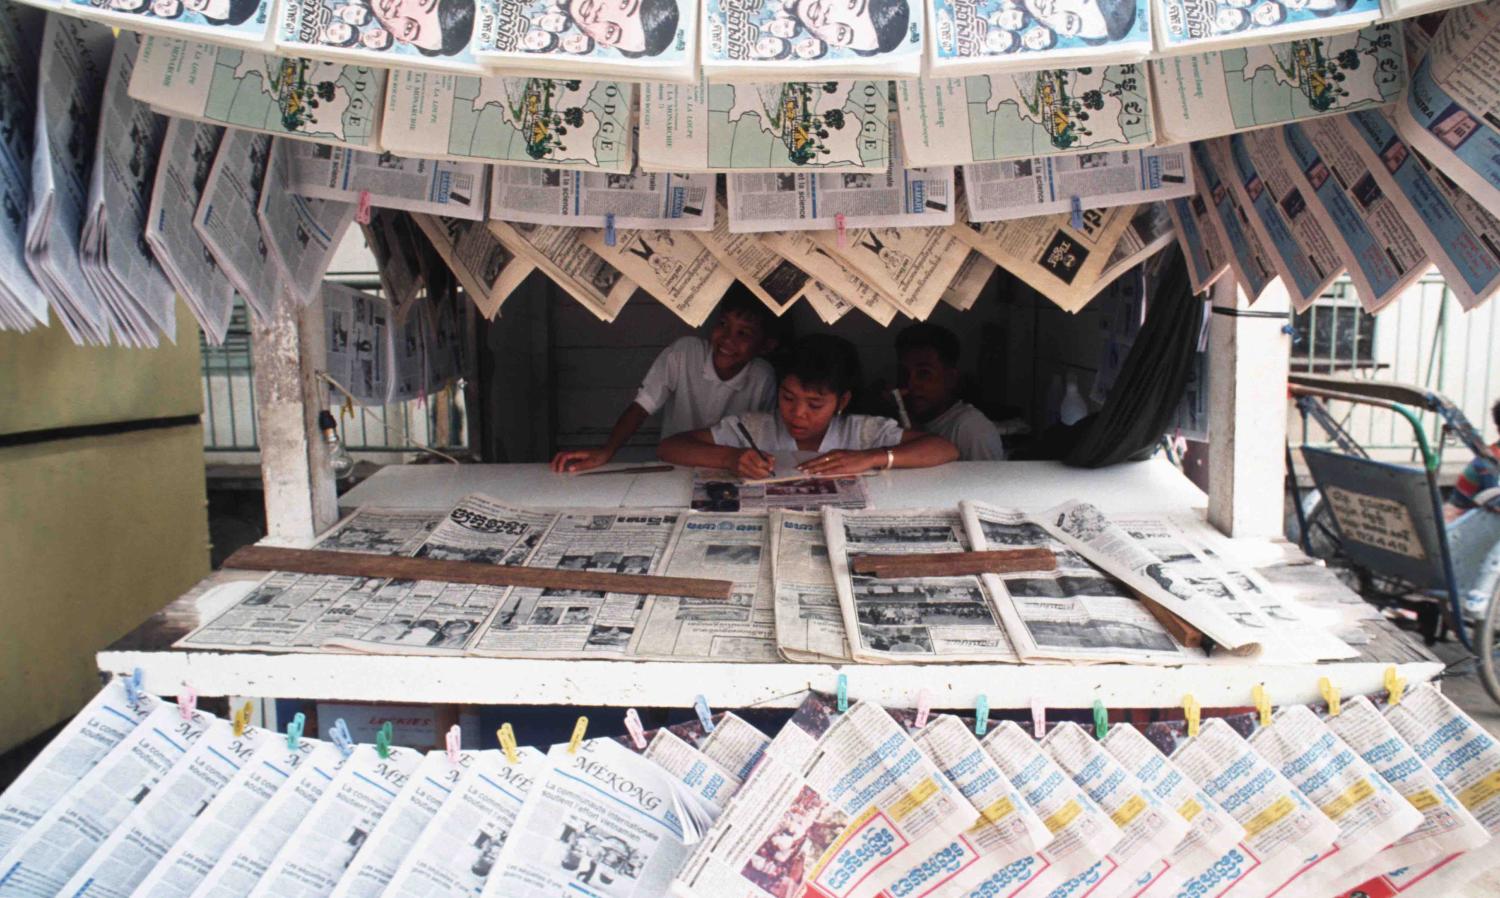 A fully stocked newspaper kiosk in 1990s Phnom Penh (Photo: Yvan Cohen via Getty Images)